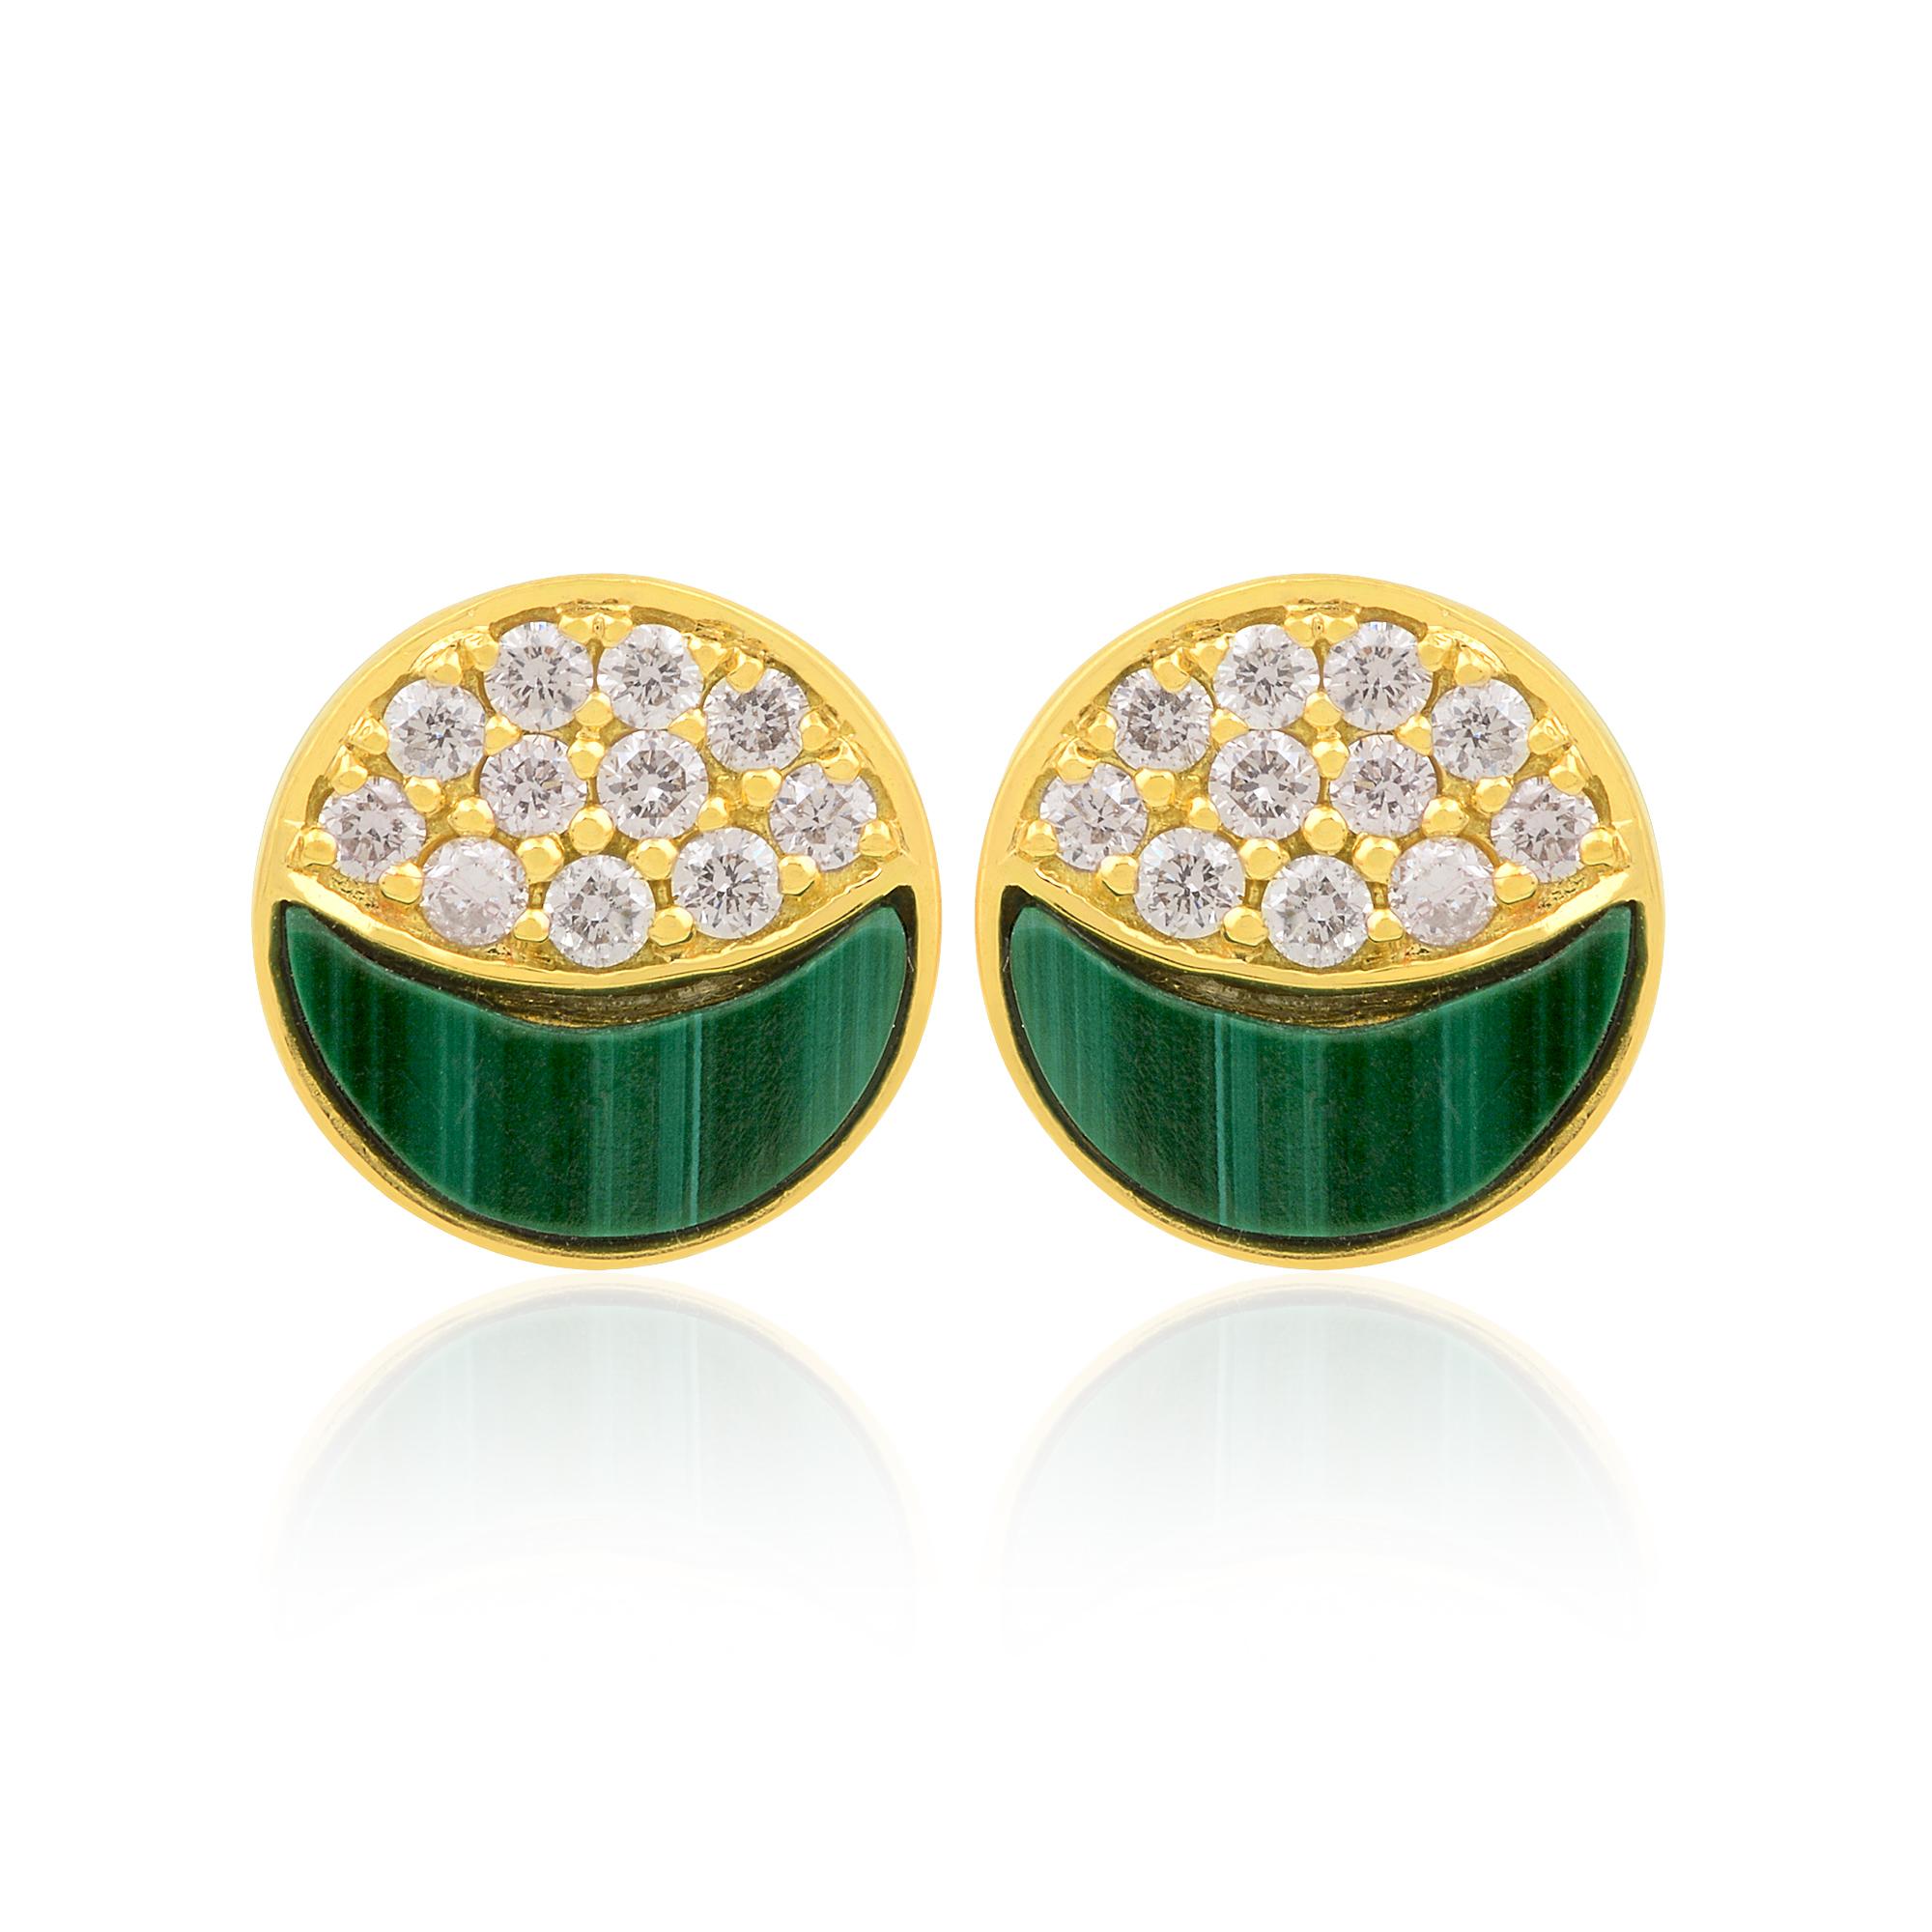 Crafted with precision and care, these earrings boast the rich green hues of genuine Malachite, a gemstone cherished for centuries for its striking beauty and mystical properties. Each Malachite stone is carefully selected for its unique patterns